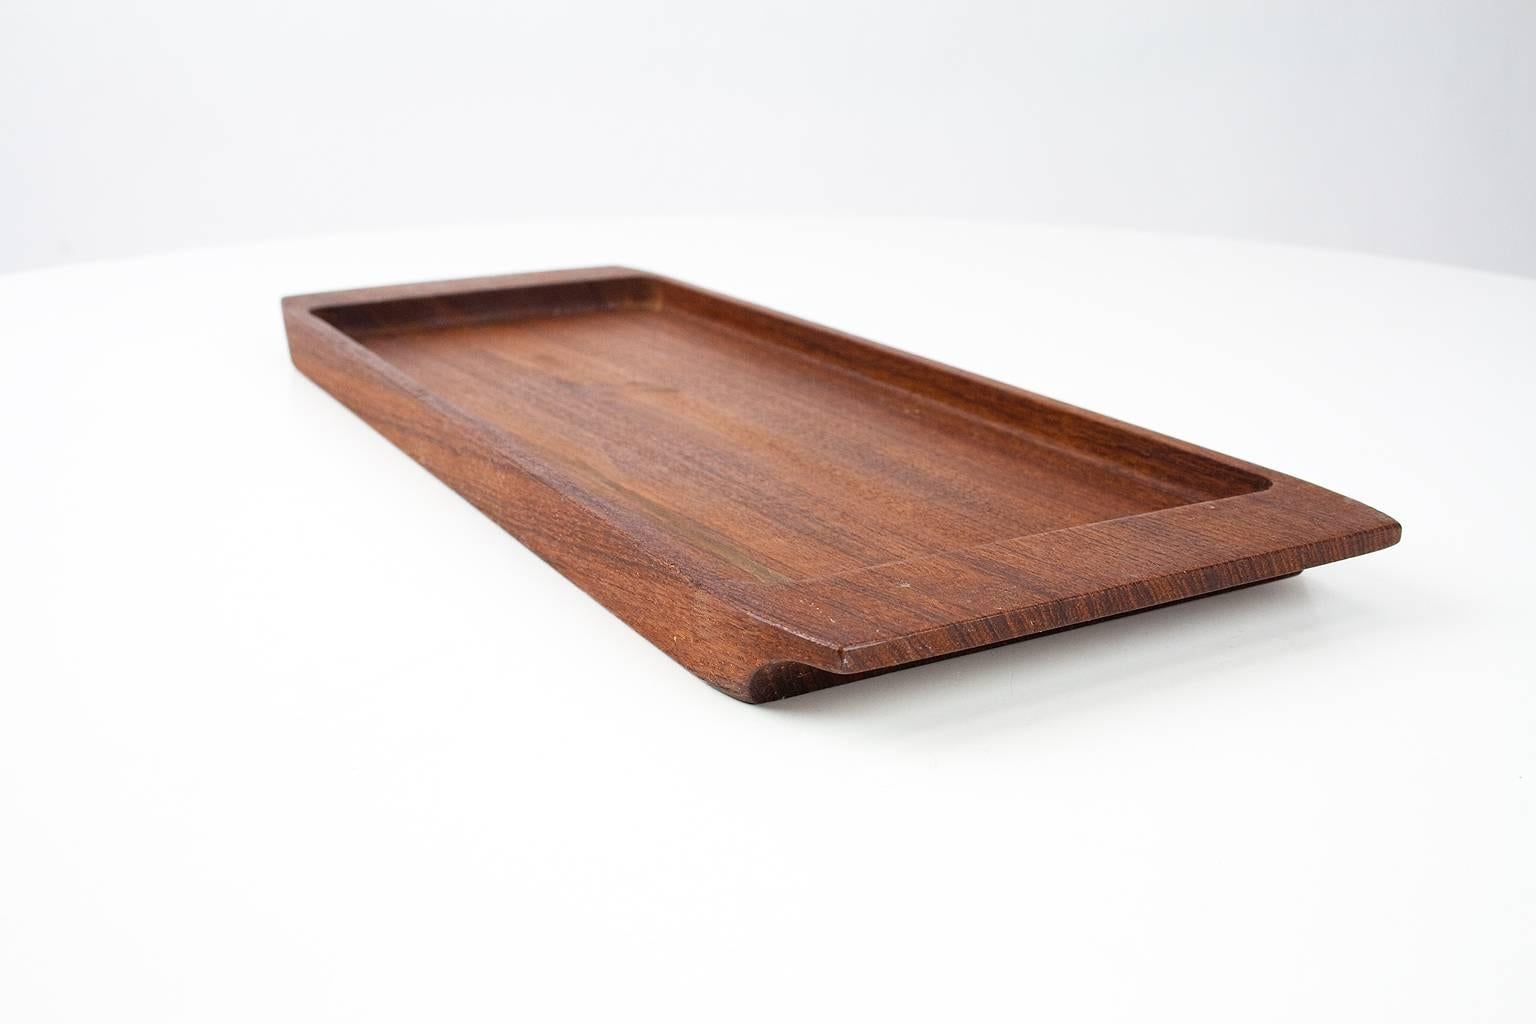 Mid-20th Century 1960s Mid-Century Danish Solid Wooden Teak Desk Accessory or Table Tray